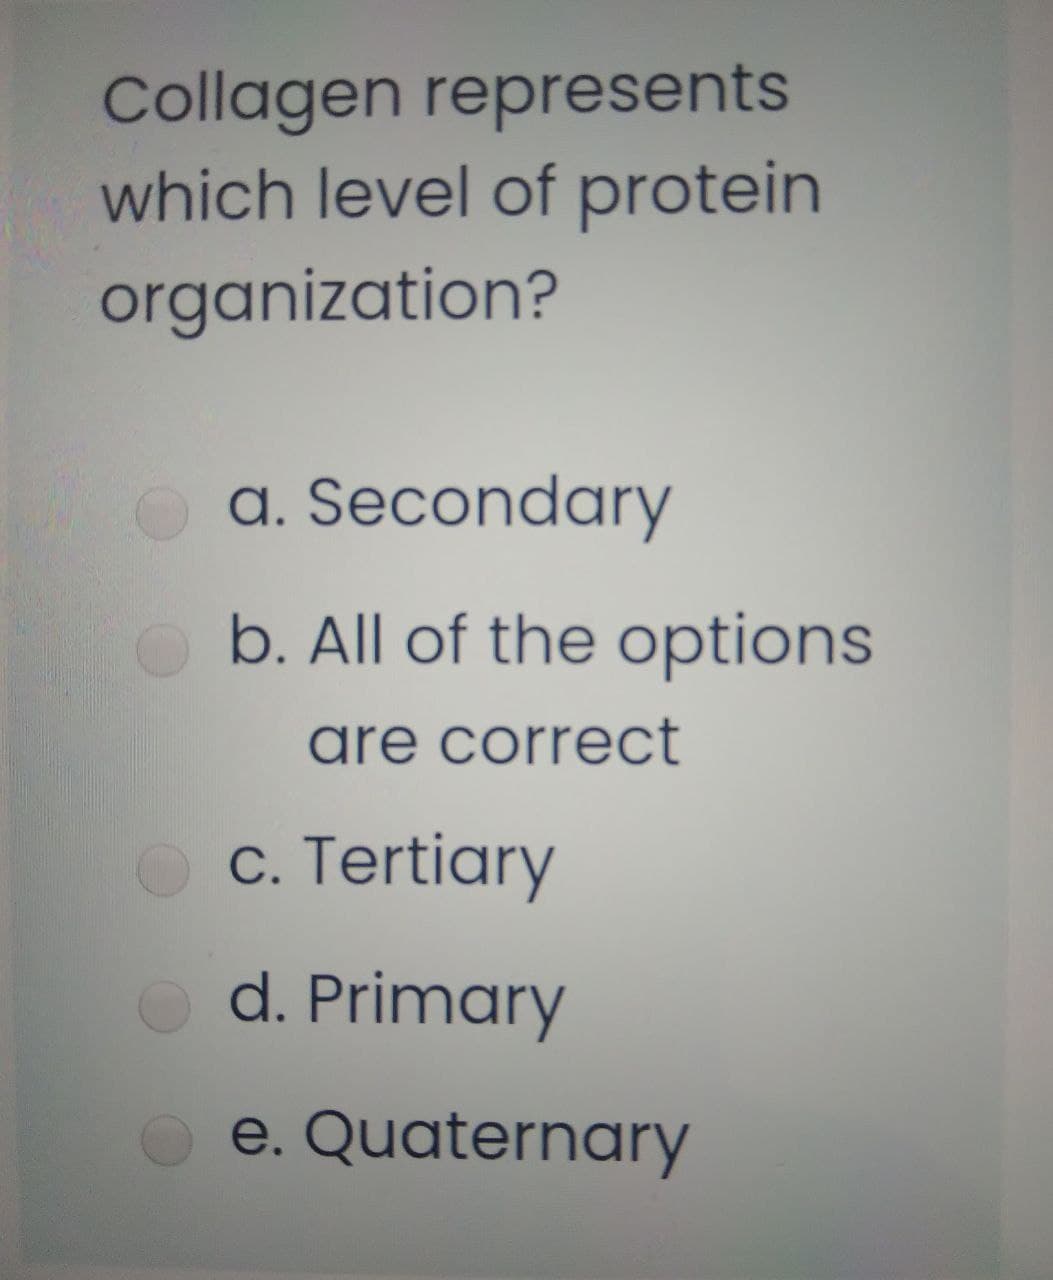 Collagen represents
which level of protein
organization?
a. Secondary
b. All of the options
are correct
c. Tertiary
d. Primary
e. Quaternary
